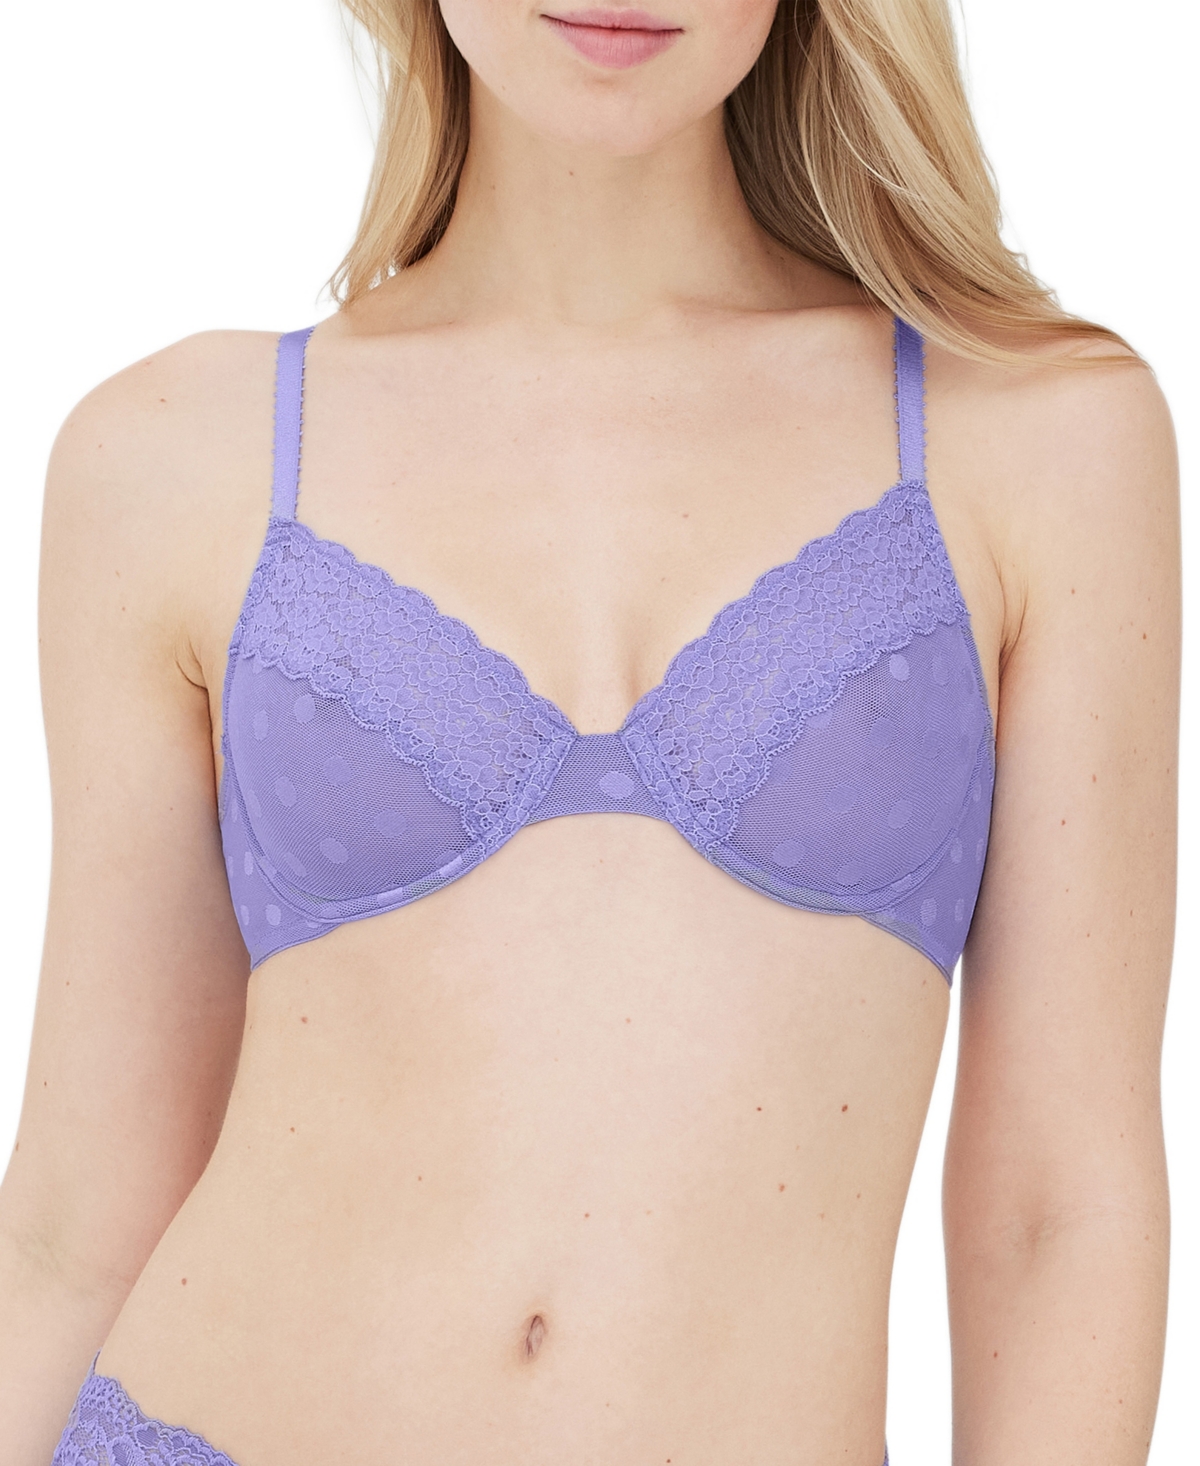 Women's Dare Dot Lace Unlined Underwire Bra with Lace - Periwinkle